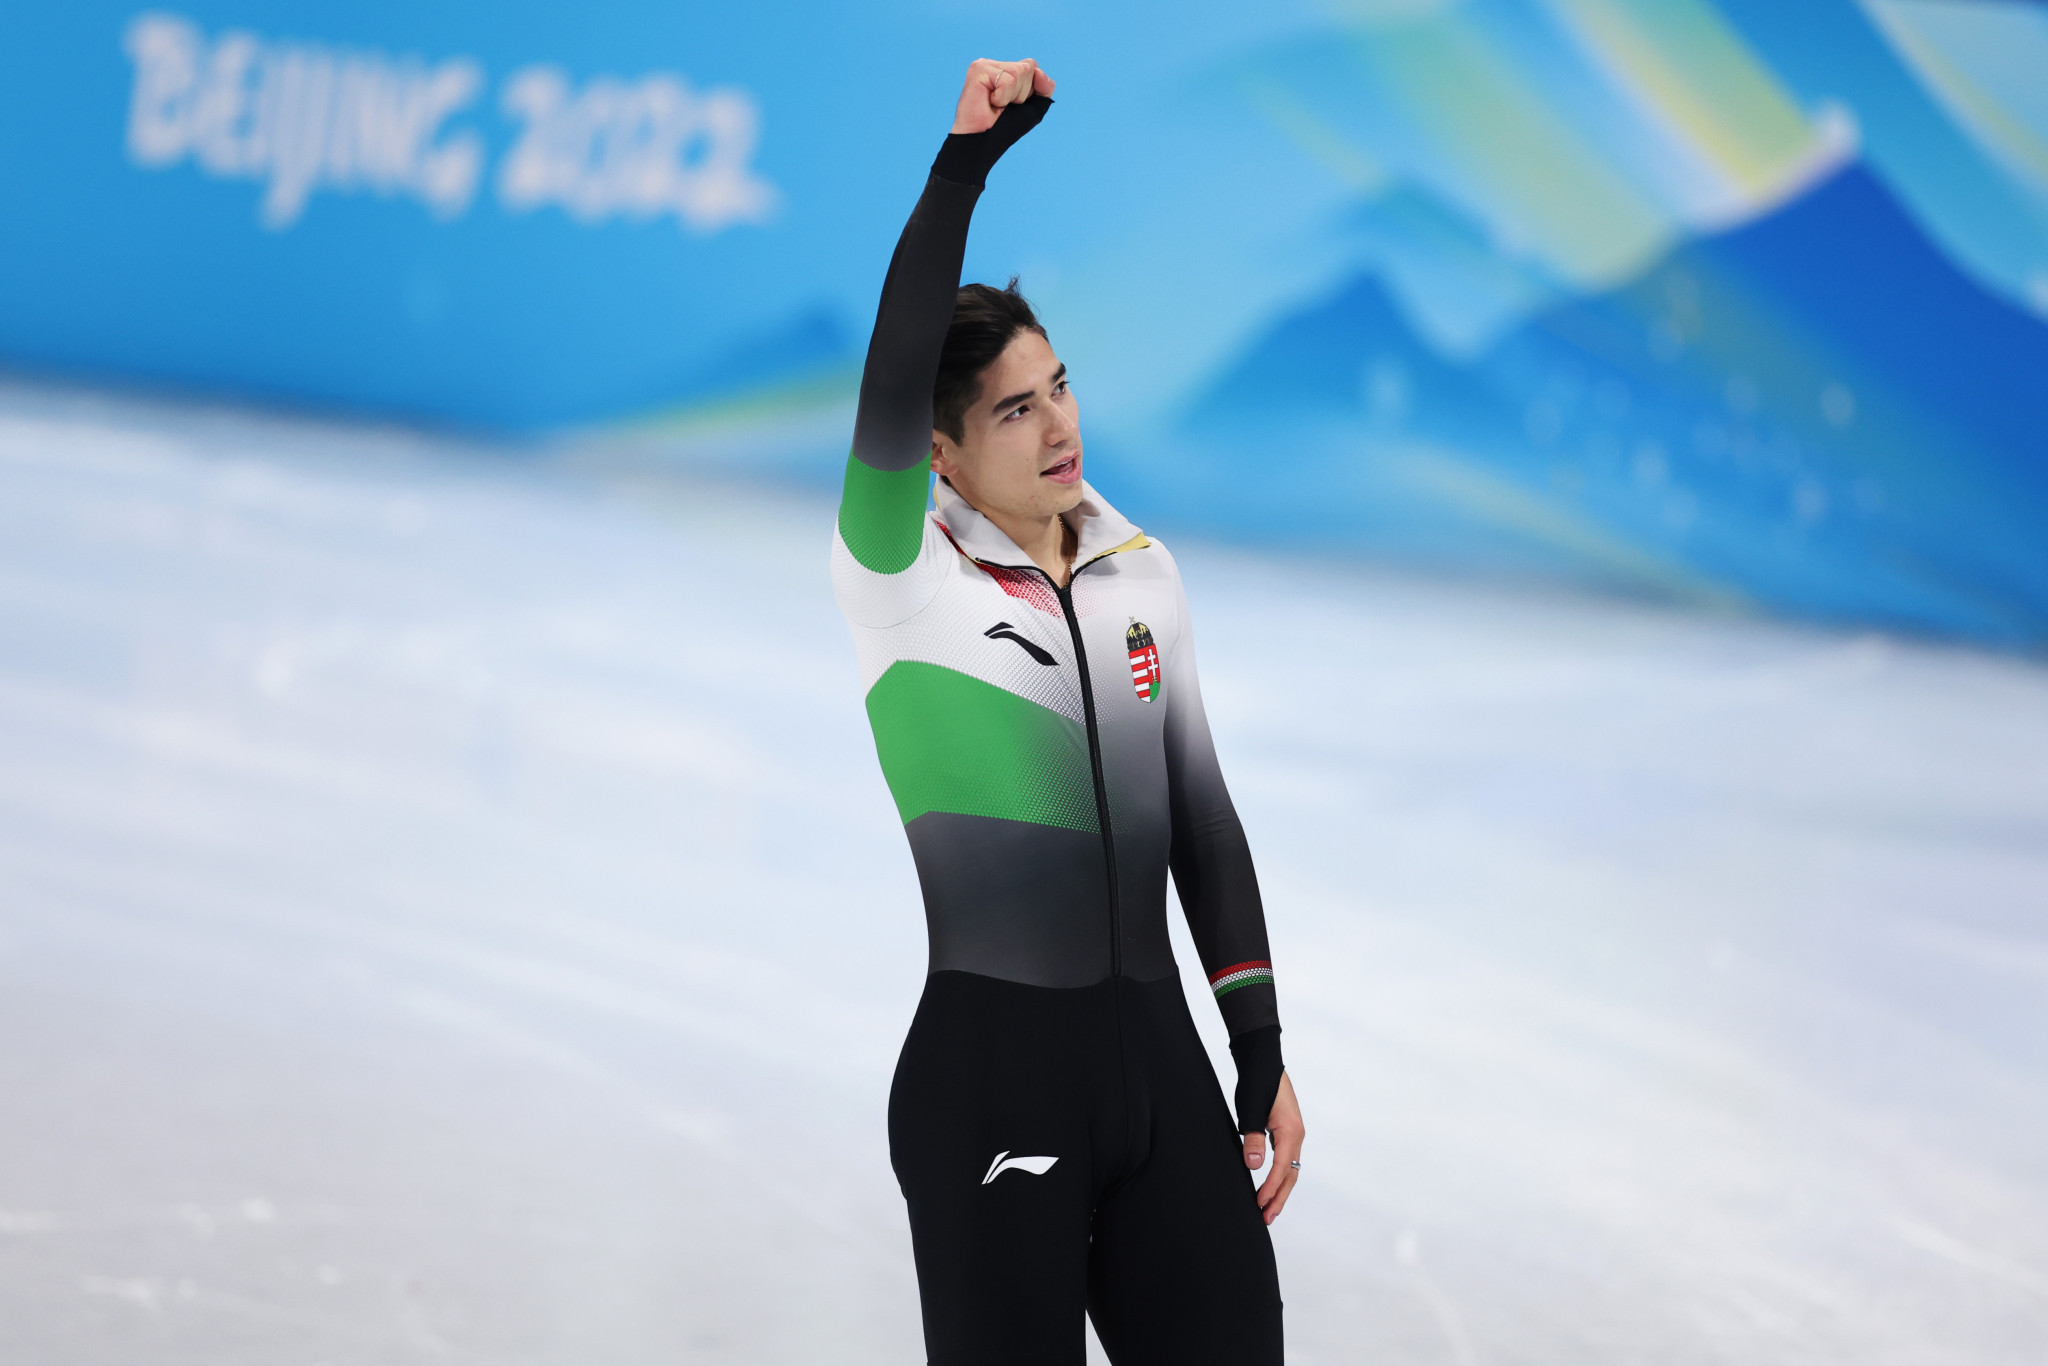 Liu retains overall title at World Short Track Speed Skating Championships